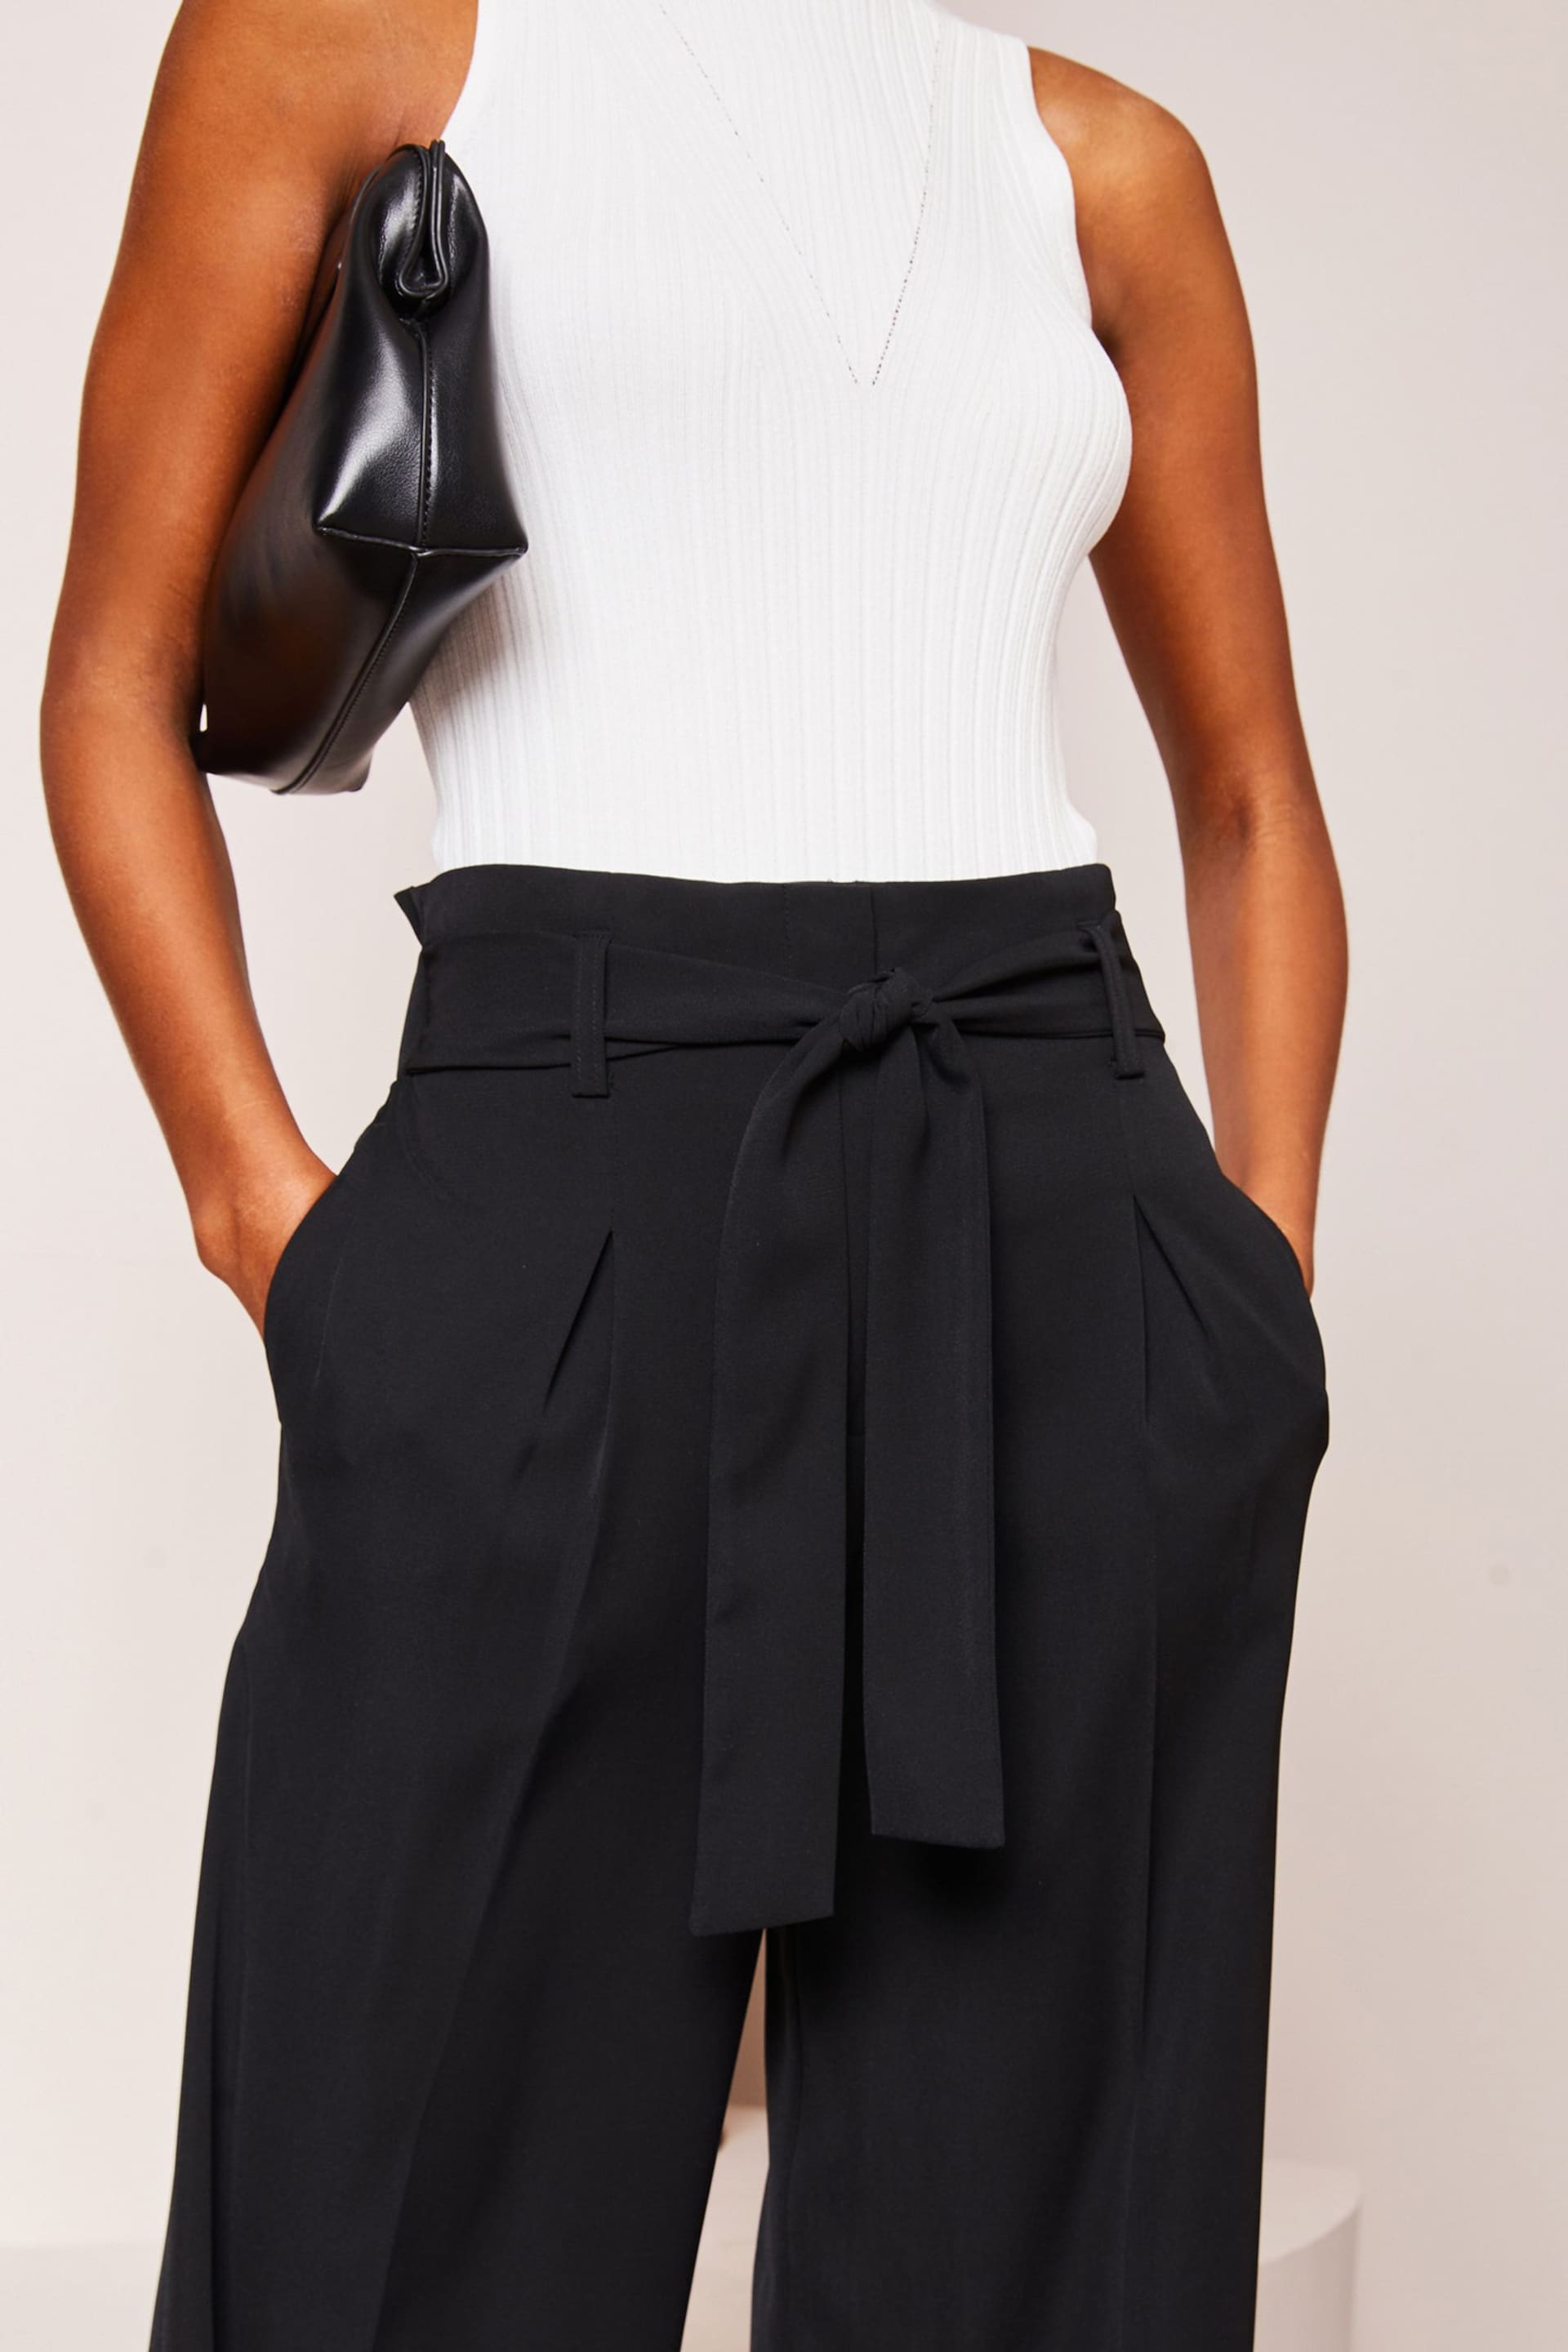 Lipsy Black Belted Wide Leg Trousers - Image 4 of 4